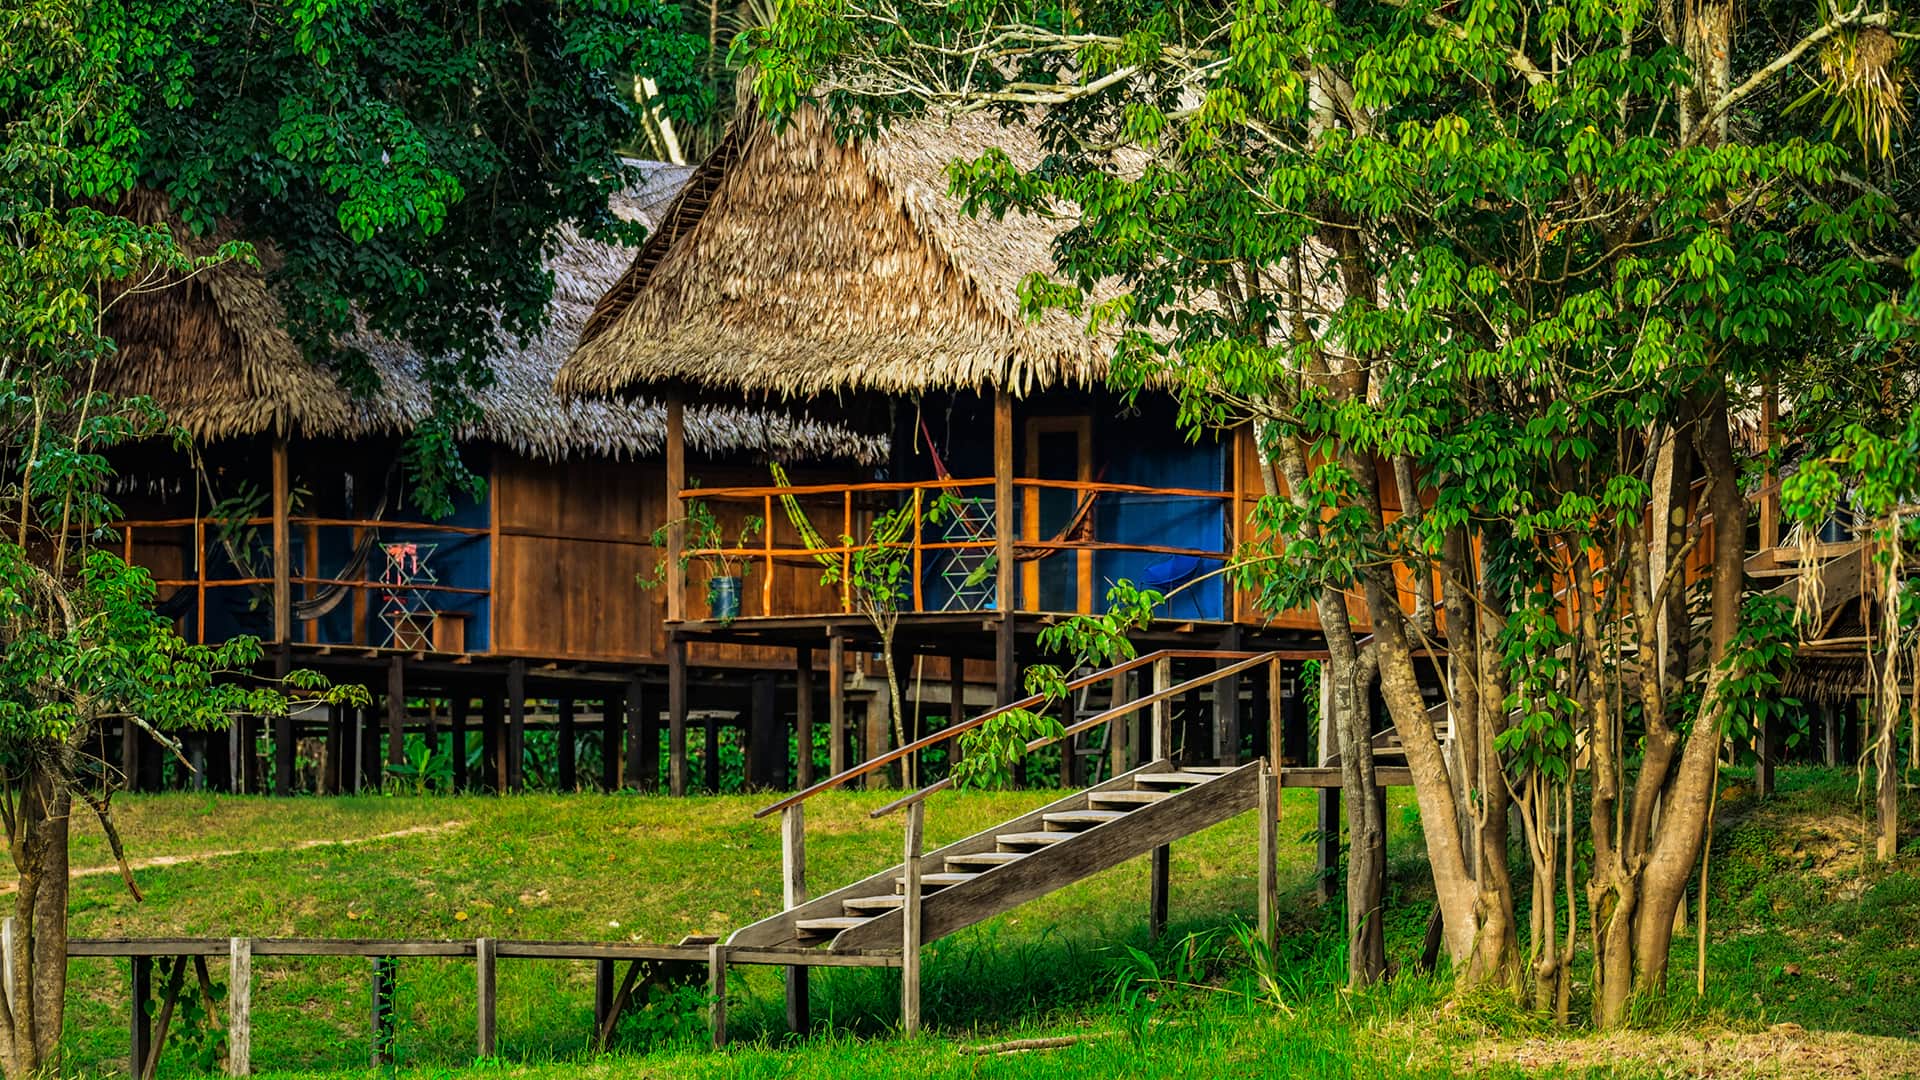 Traditional Amazonian buildings are characteristic of the lodge | Responsible Travel Peru